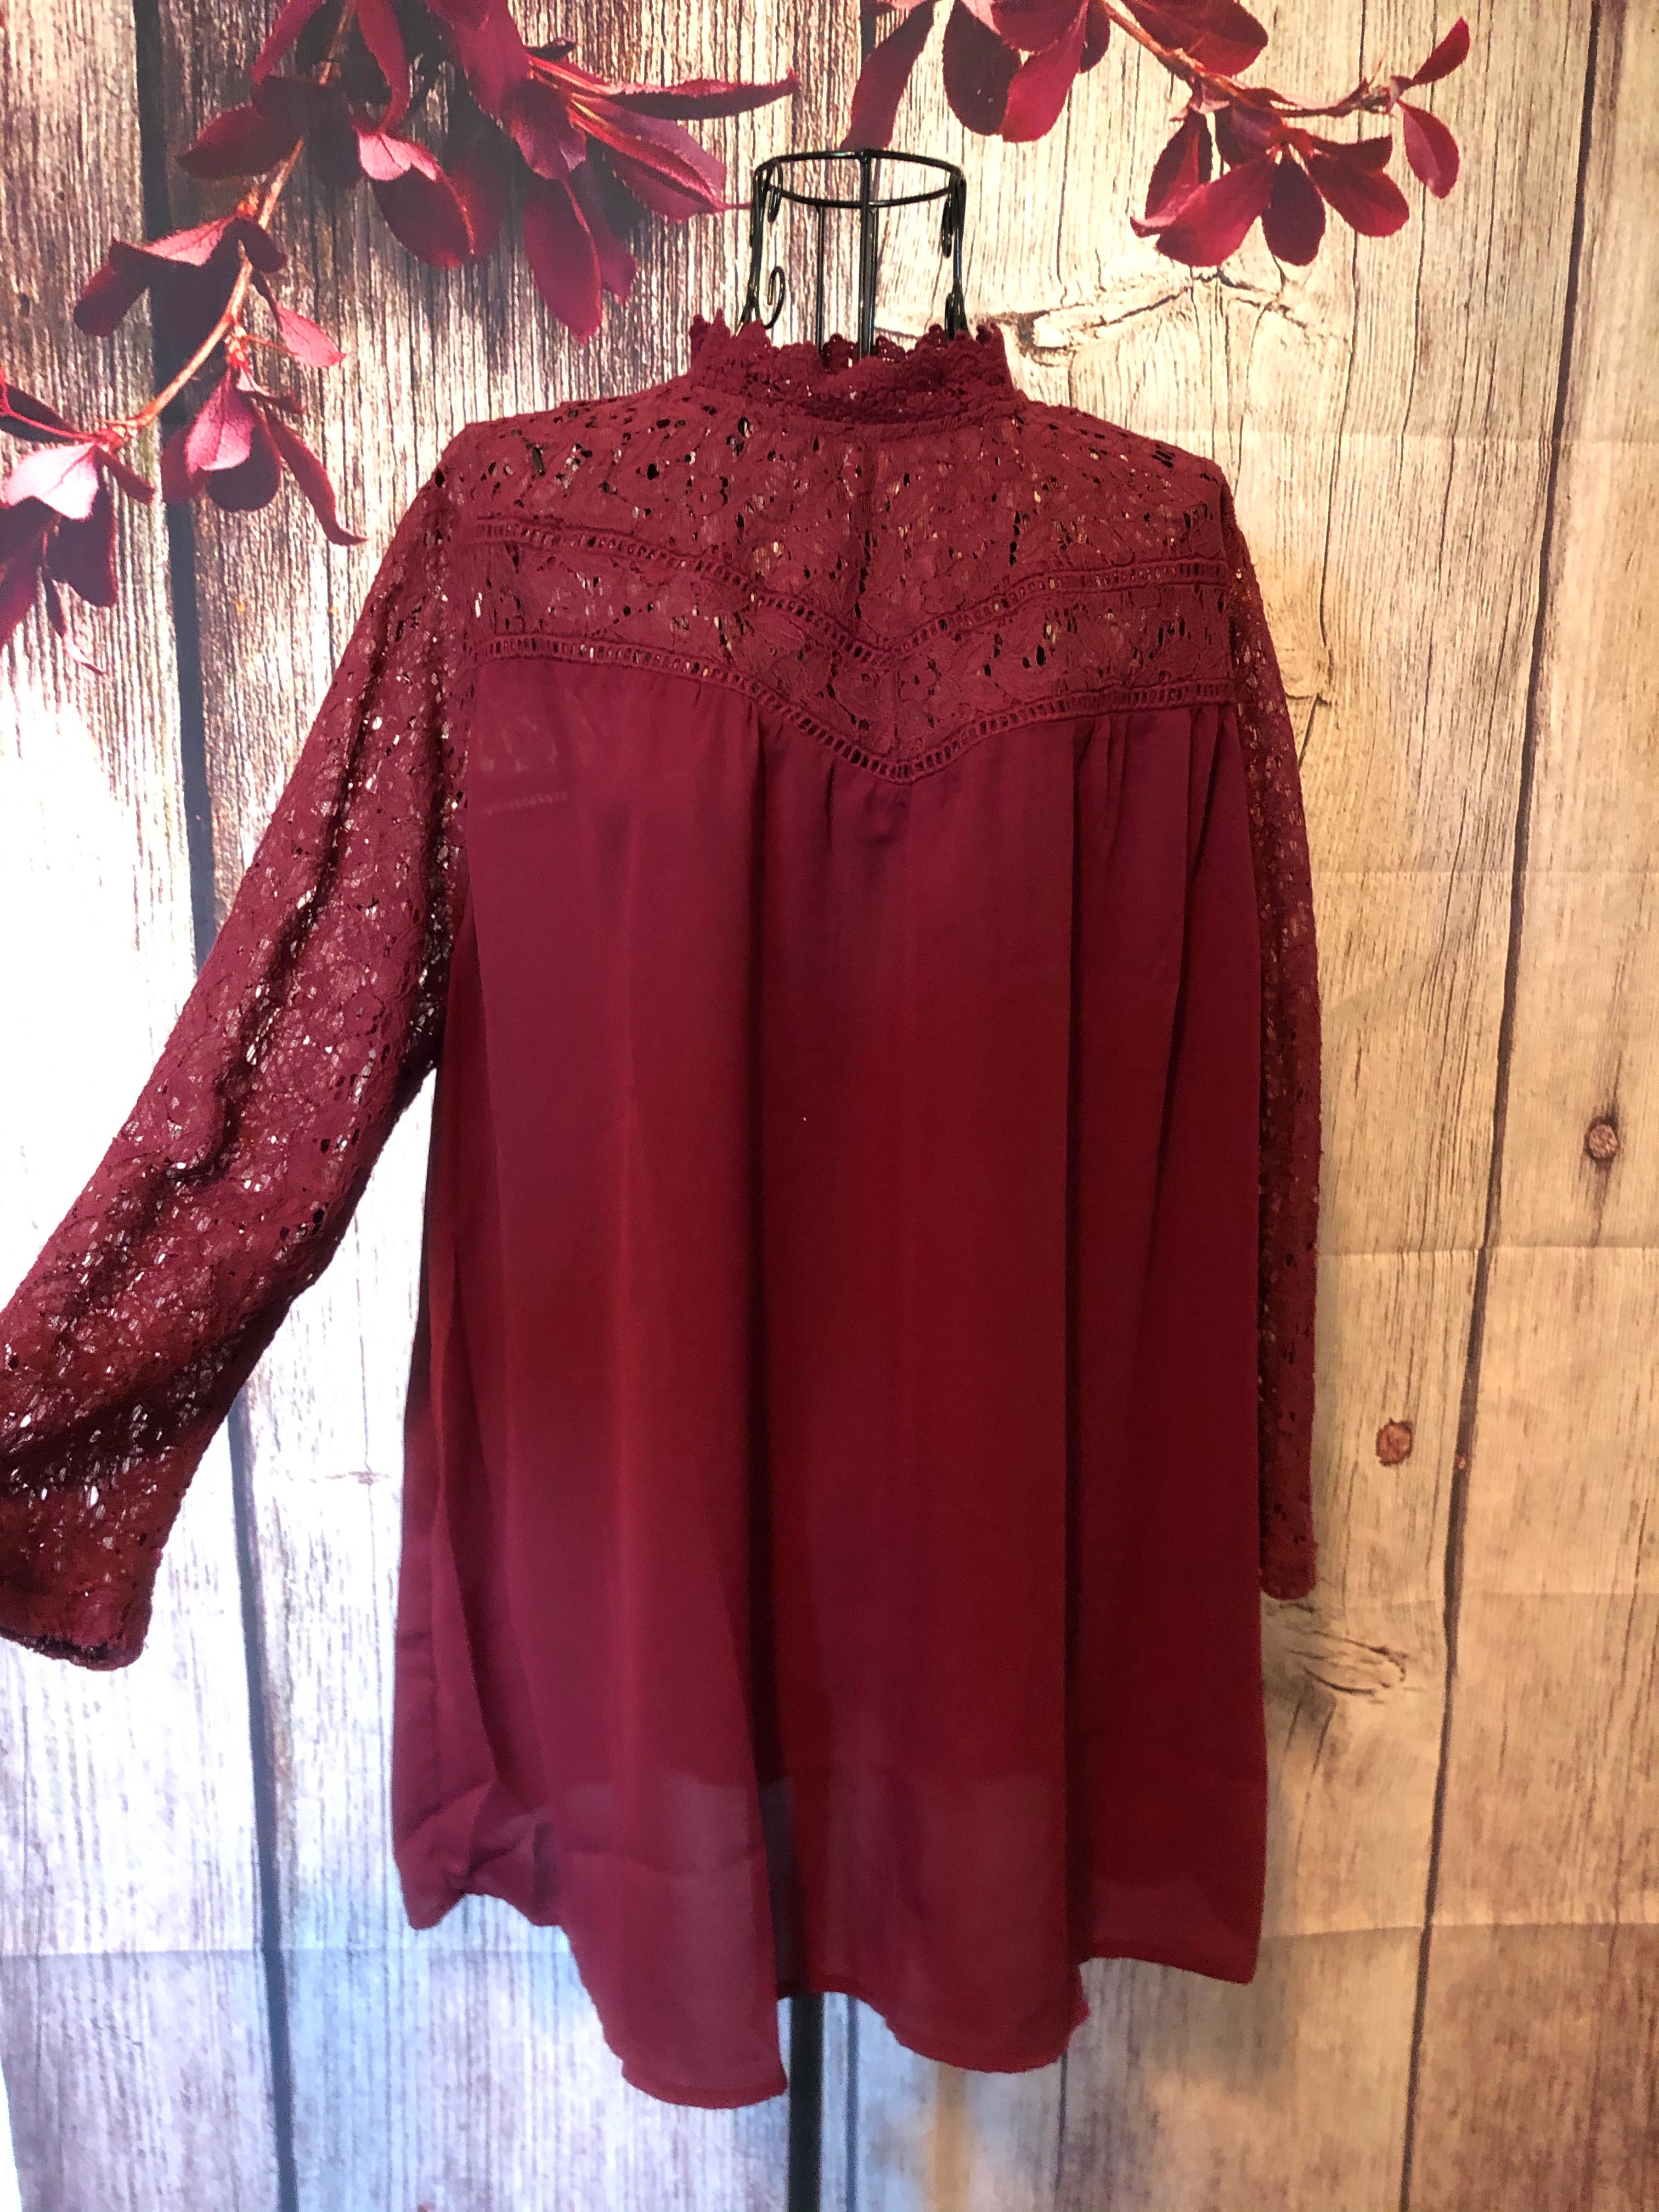 LARGE Burgundy Lace Top